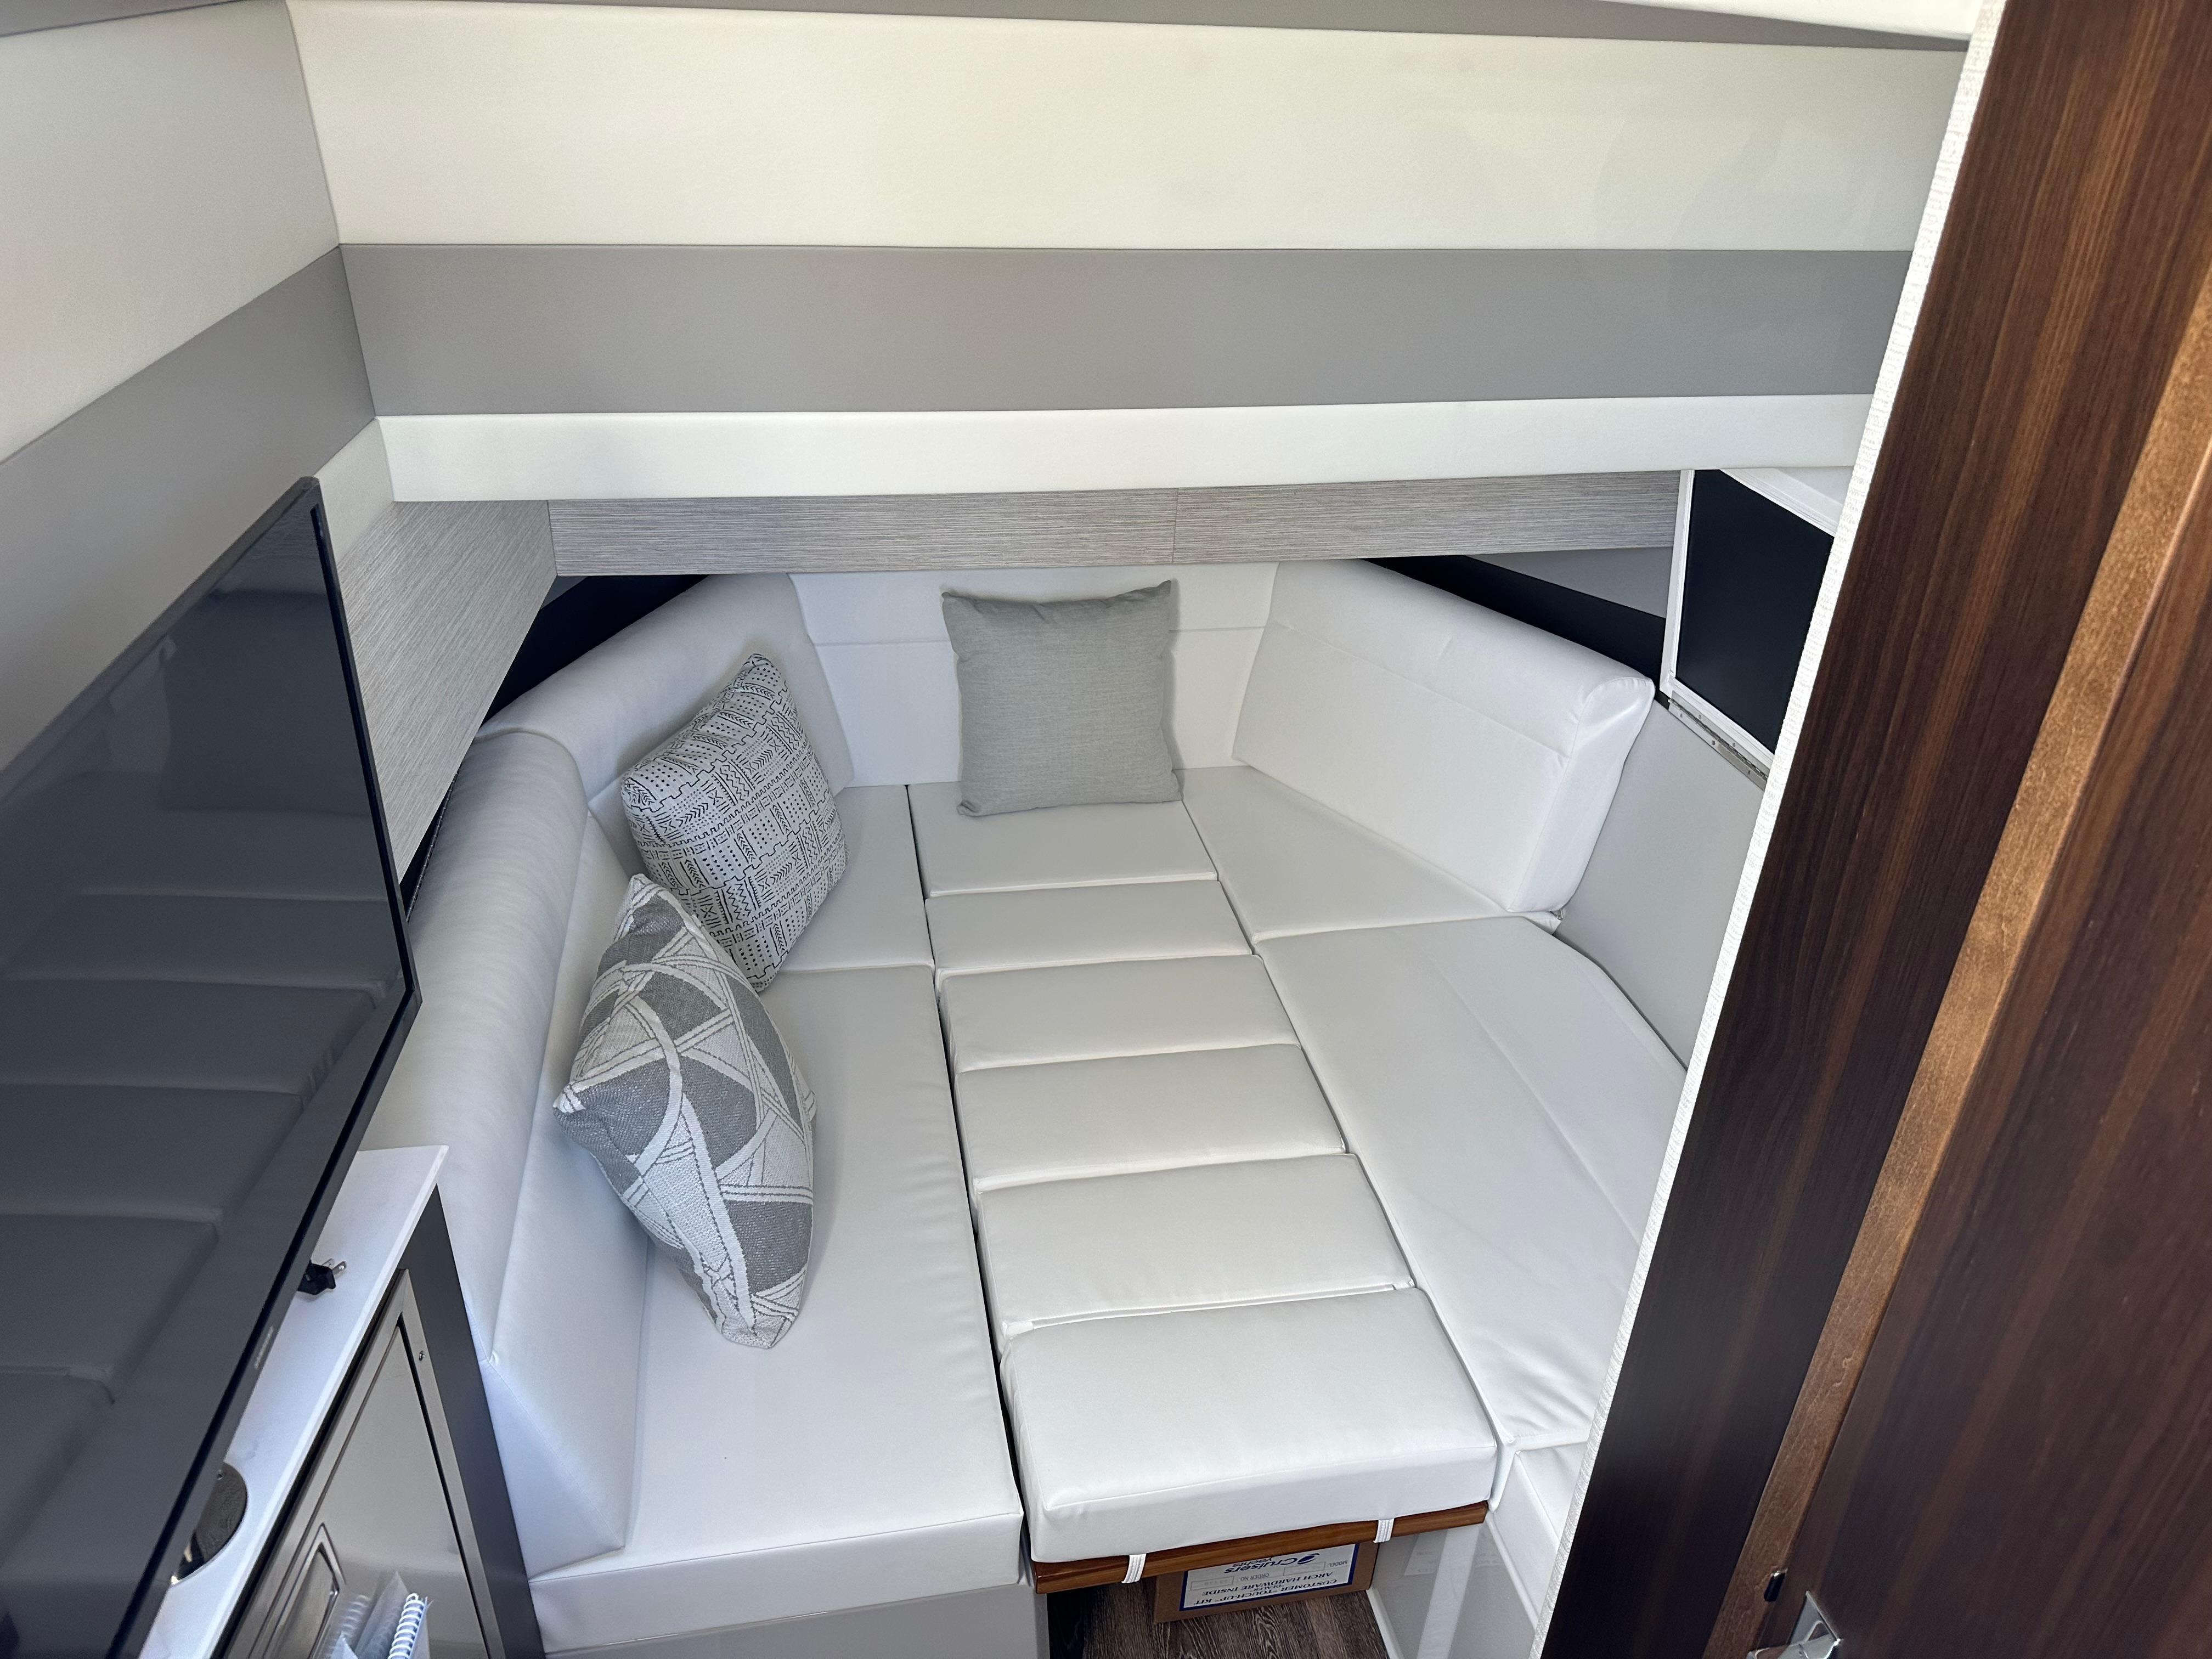 V Berth converted to sleeper table under cushions